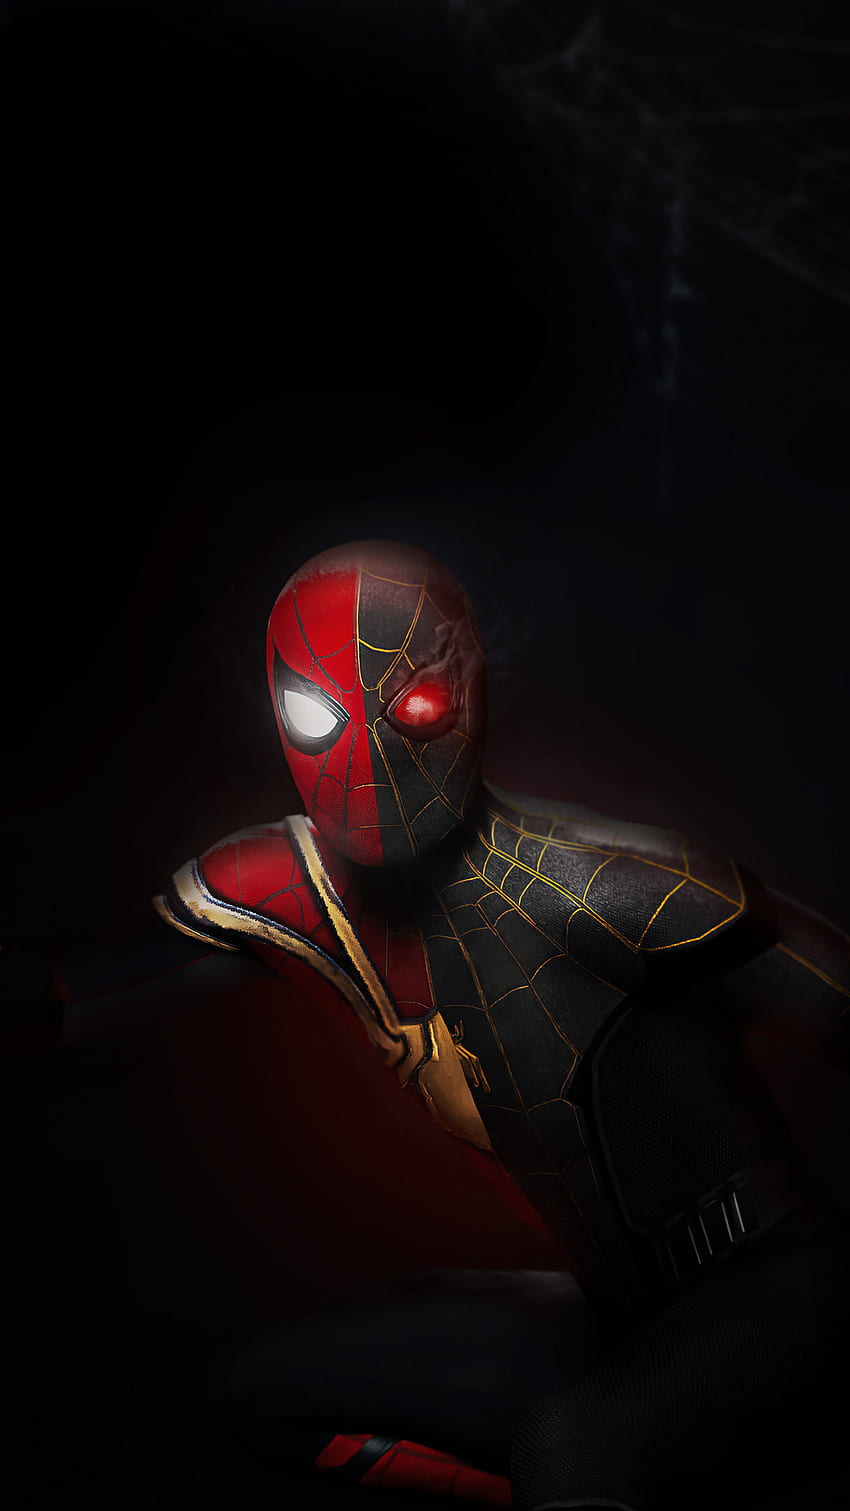 Spider-Man Amoled, game, Spider Man, entertainment, comics, black, oled, no way home, sin camino a casa, movies, ps4, red, gold suite, dark, games, black suite, comic HD phone wallpaper